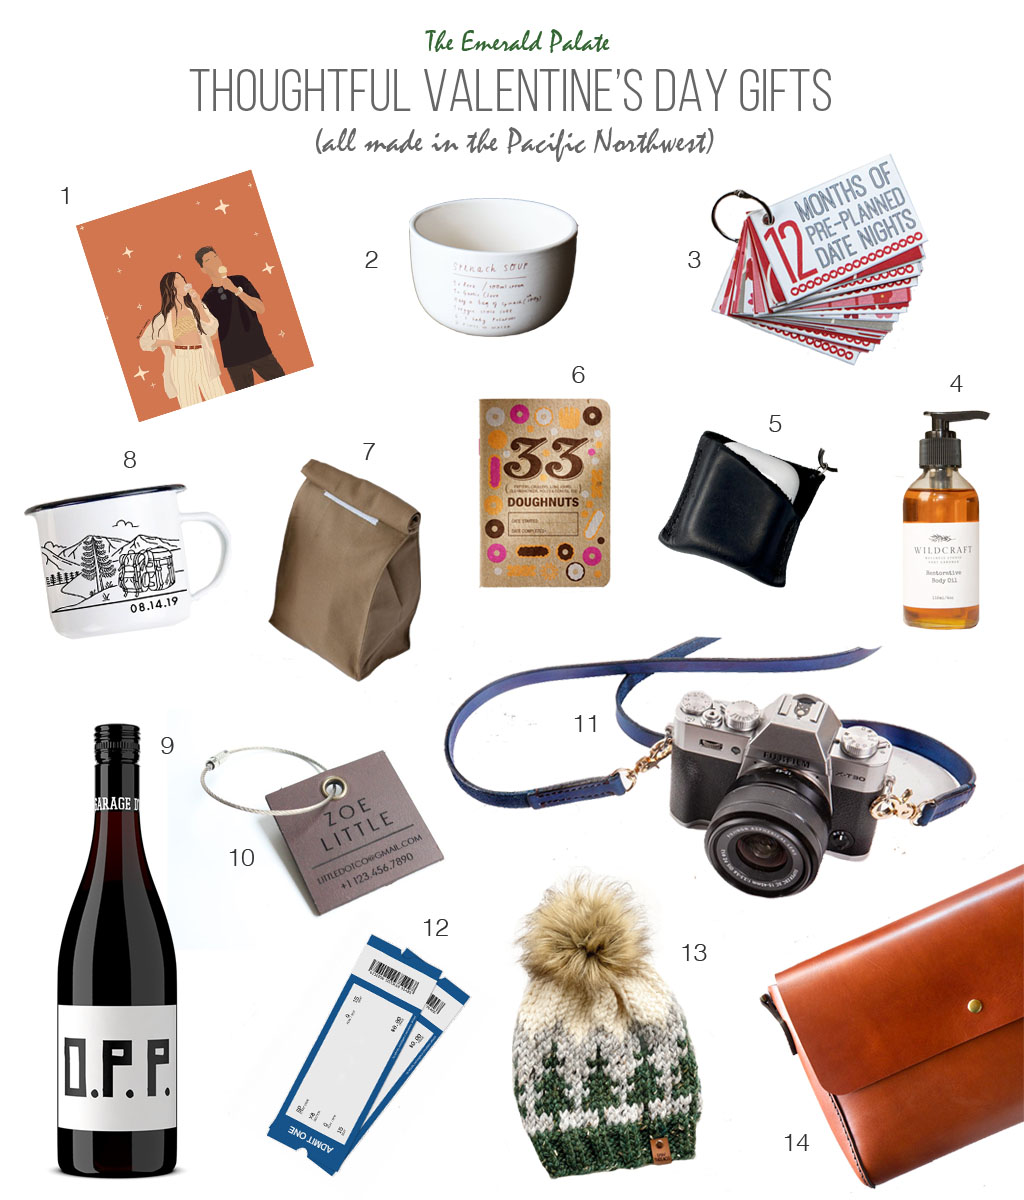 Thoughtful Gift Ideas for Seniors